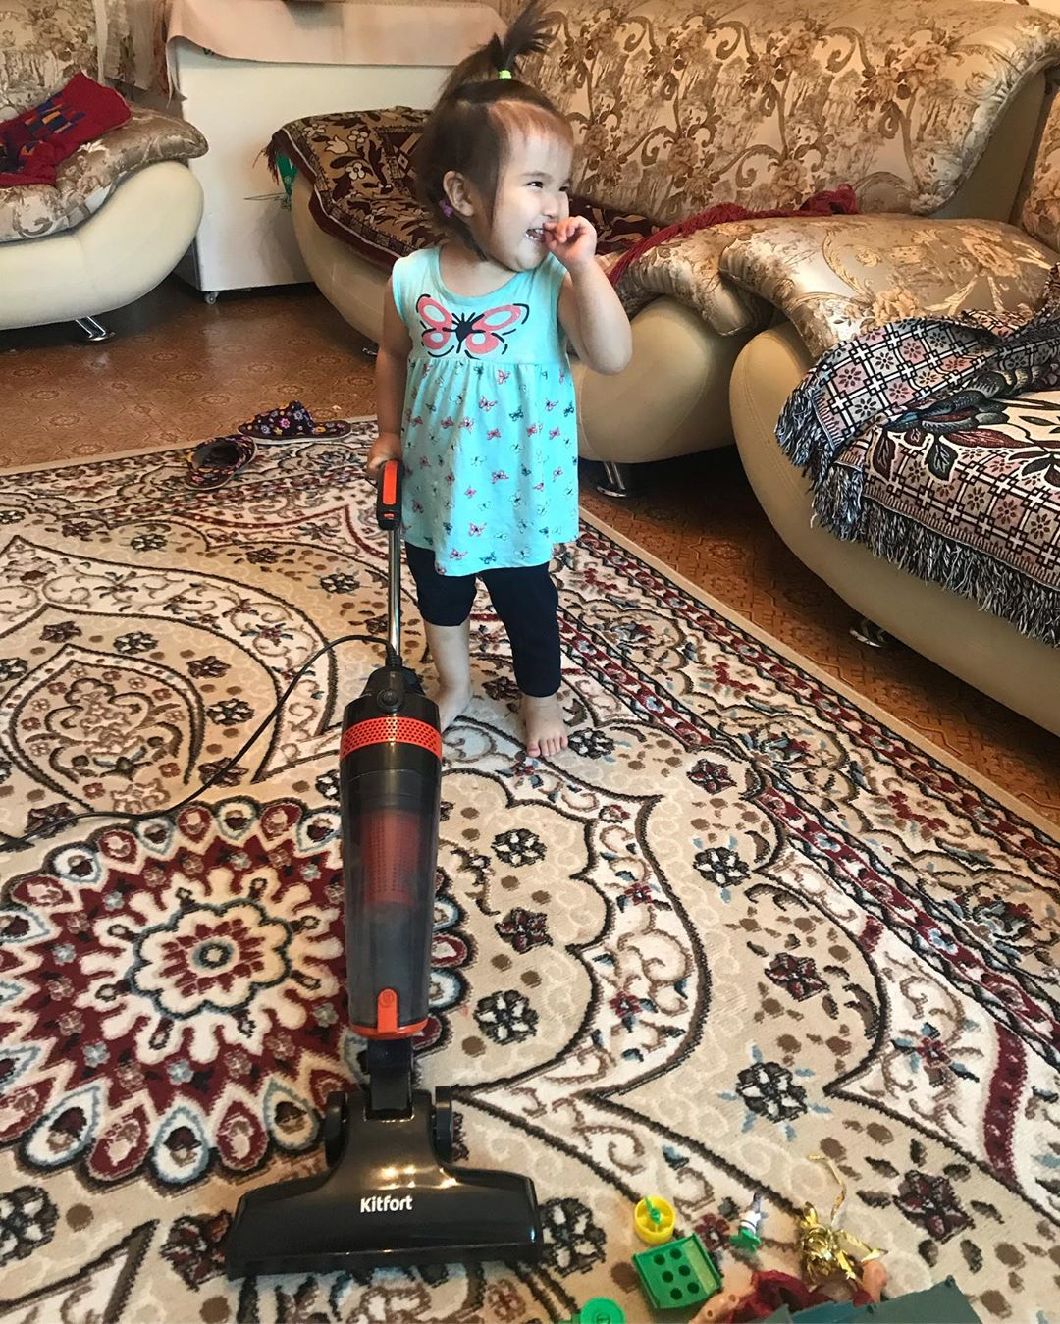 Heavy Duty Vacuum Cleaner for Floor Care